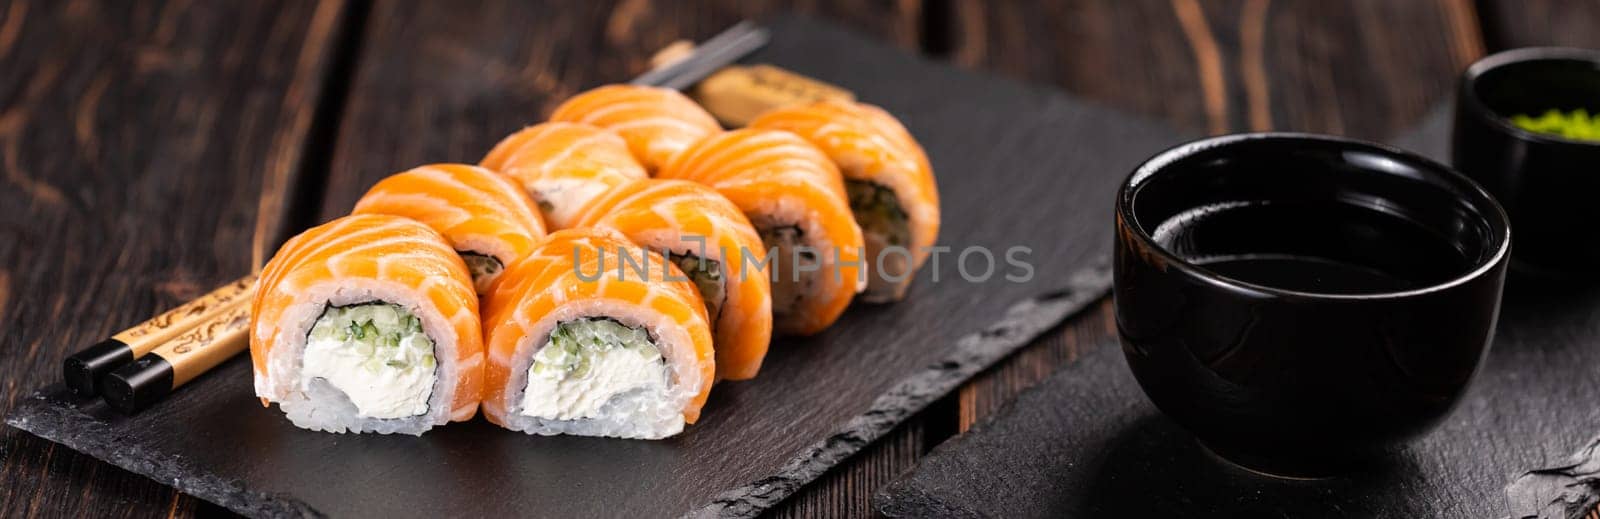 Banner Sushi roll philadelphia with salmon and cucumber and cream cheese on black background close-up. Sushi menu. Japanese food concept by Satura86